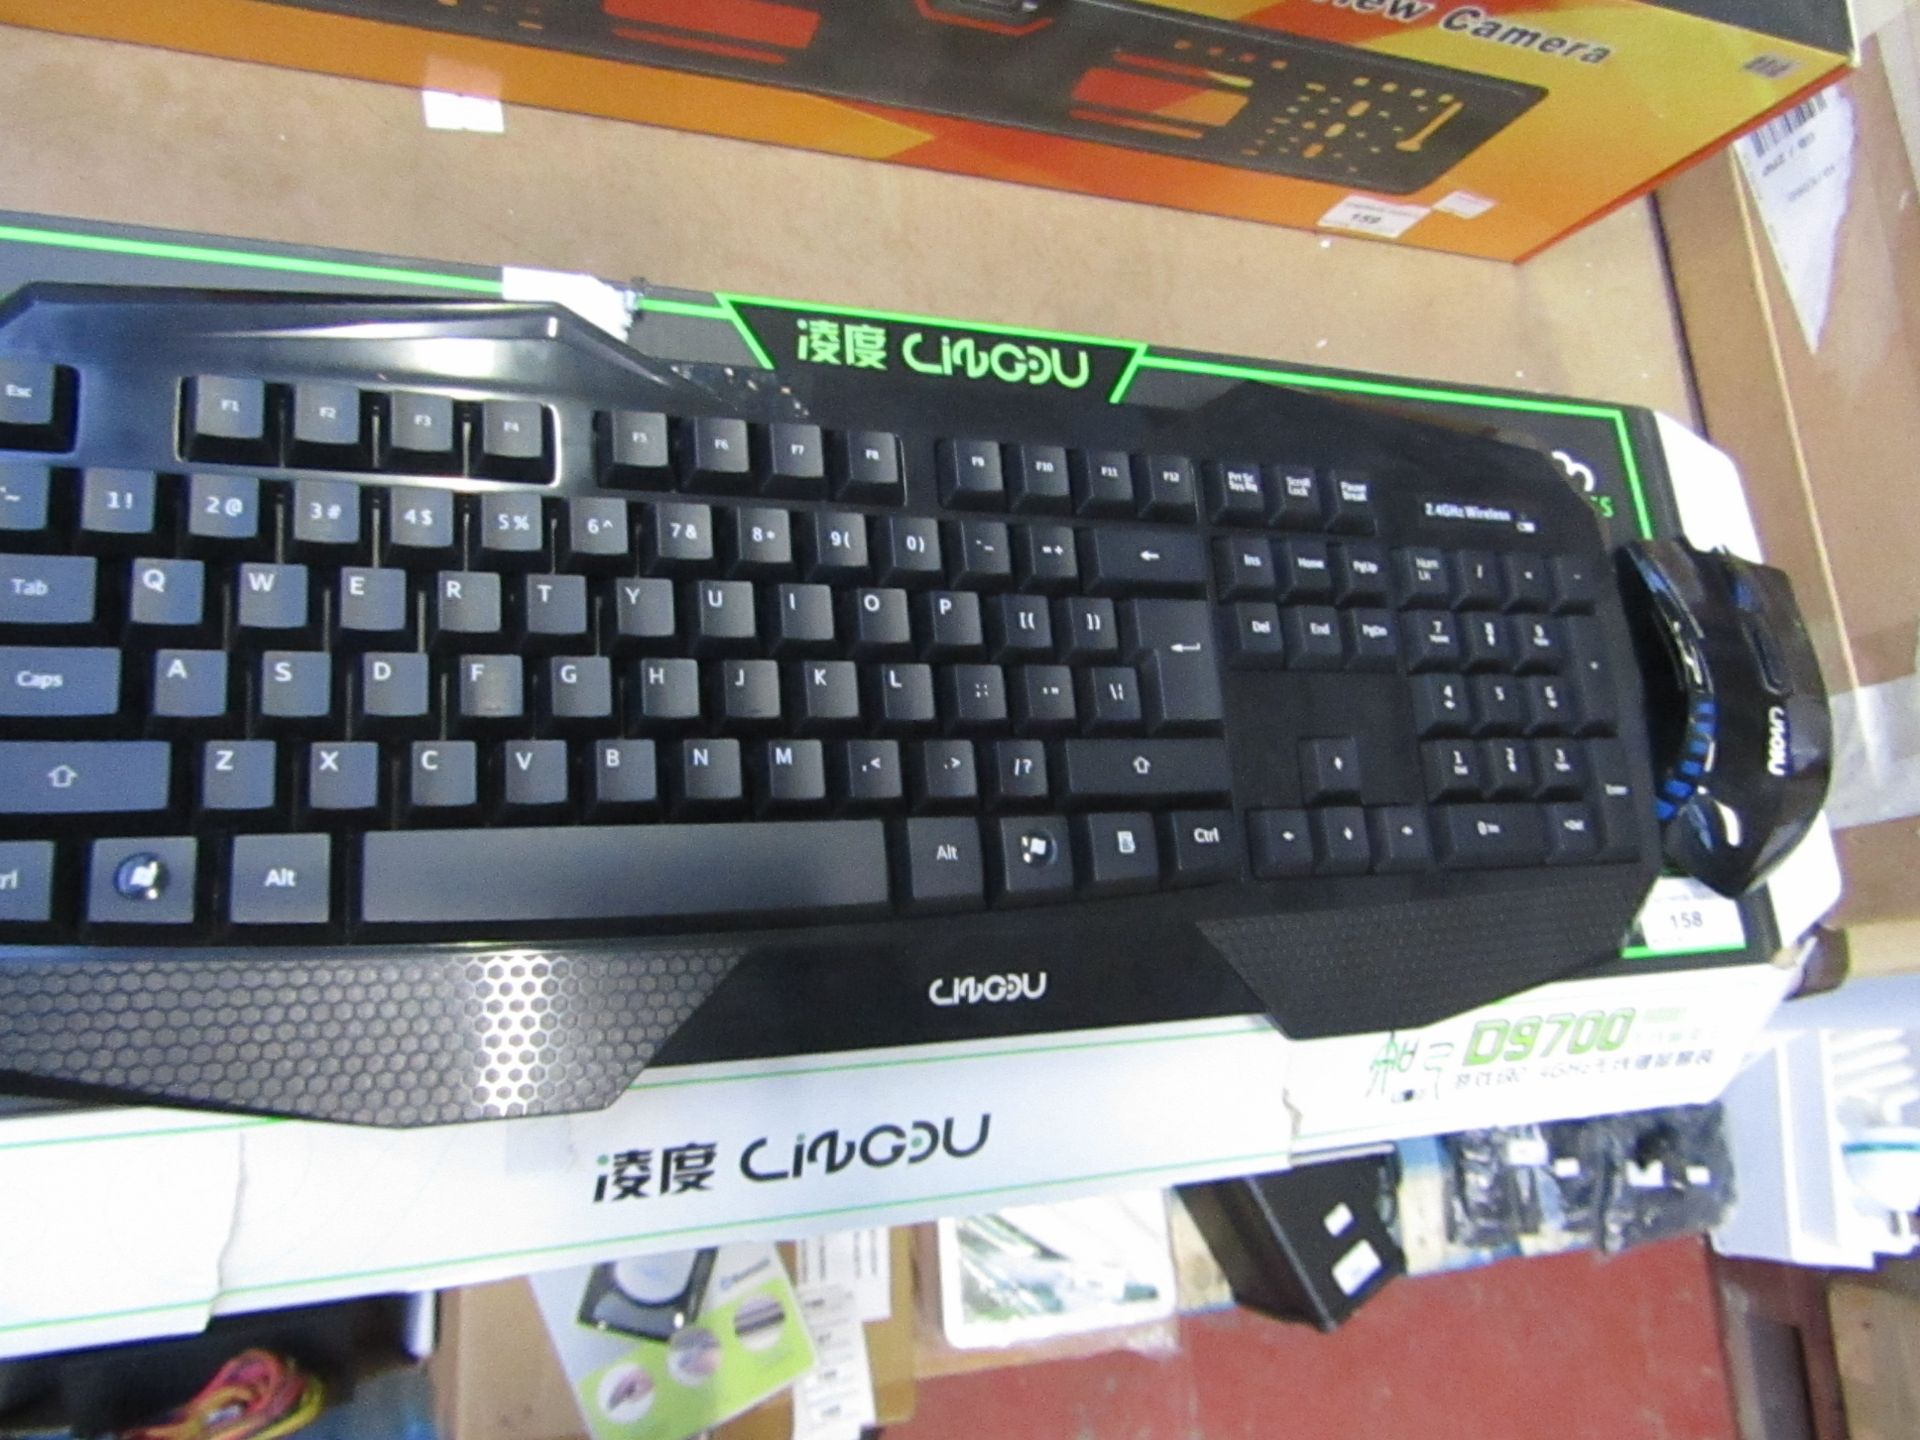 D9700 wireless gaming keyboard and mouse, tested working and boxed.